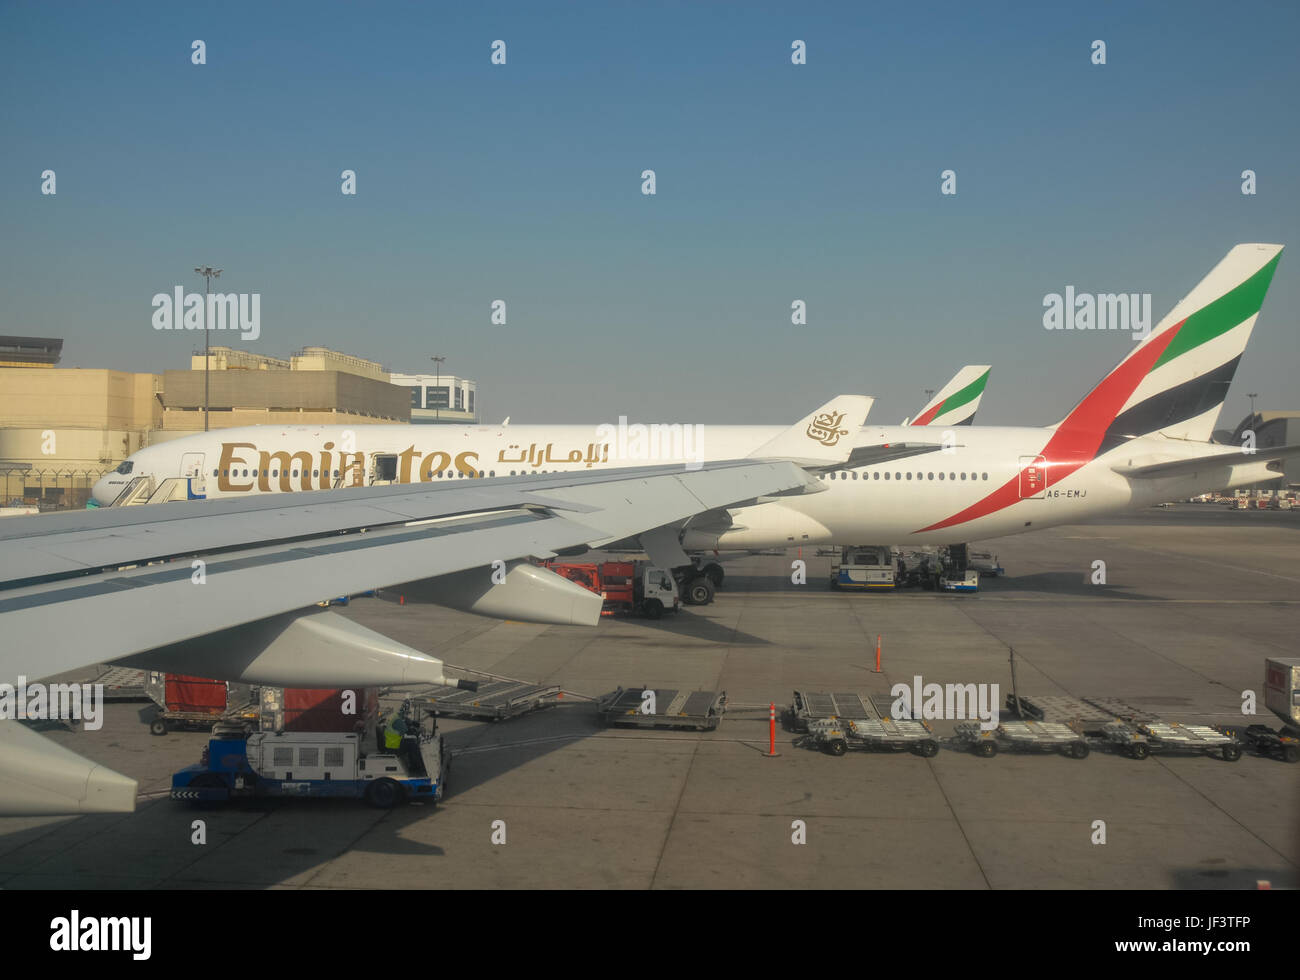 airplanes at airport from dubai,vae Stock Photo